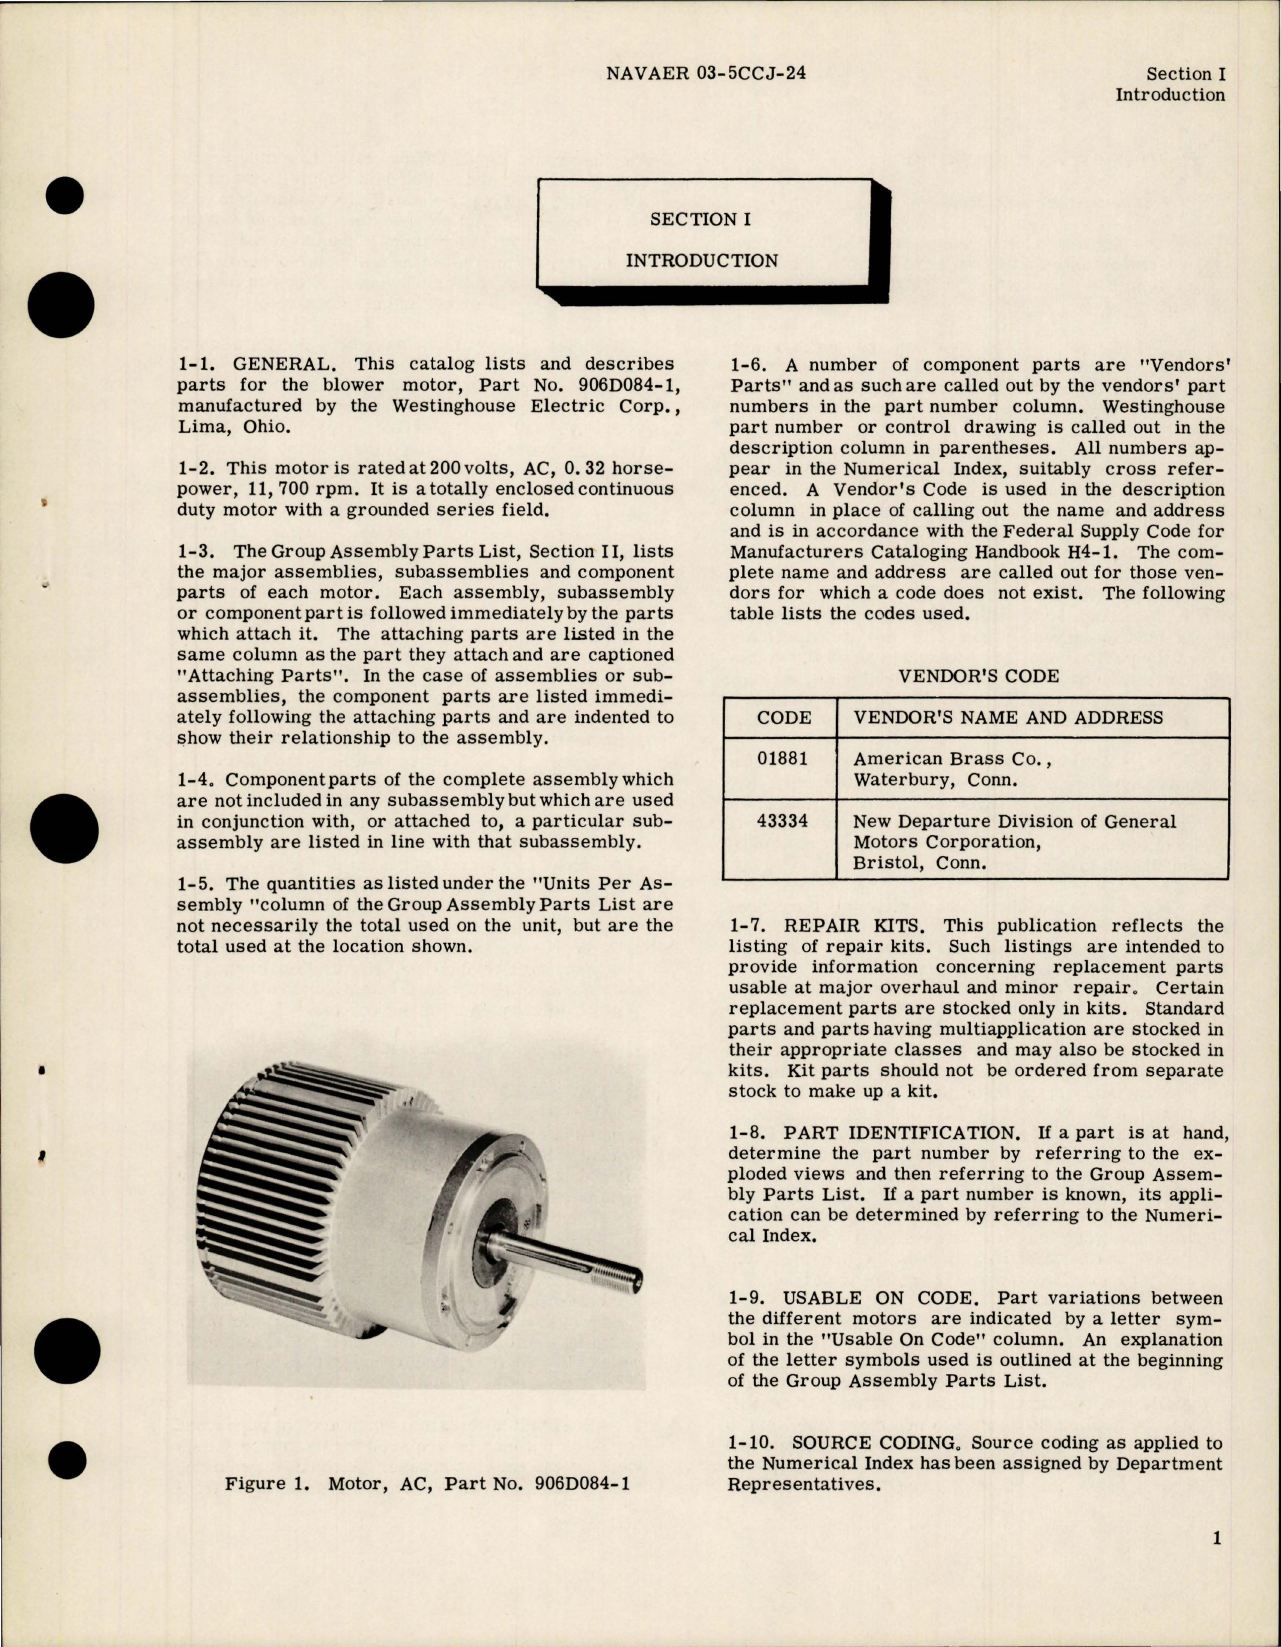 Sample page 5 from AirCorps Library document: Illustrated Parts Breakdown for AC Motor - Part 906D084-1 